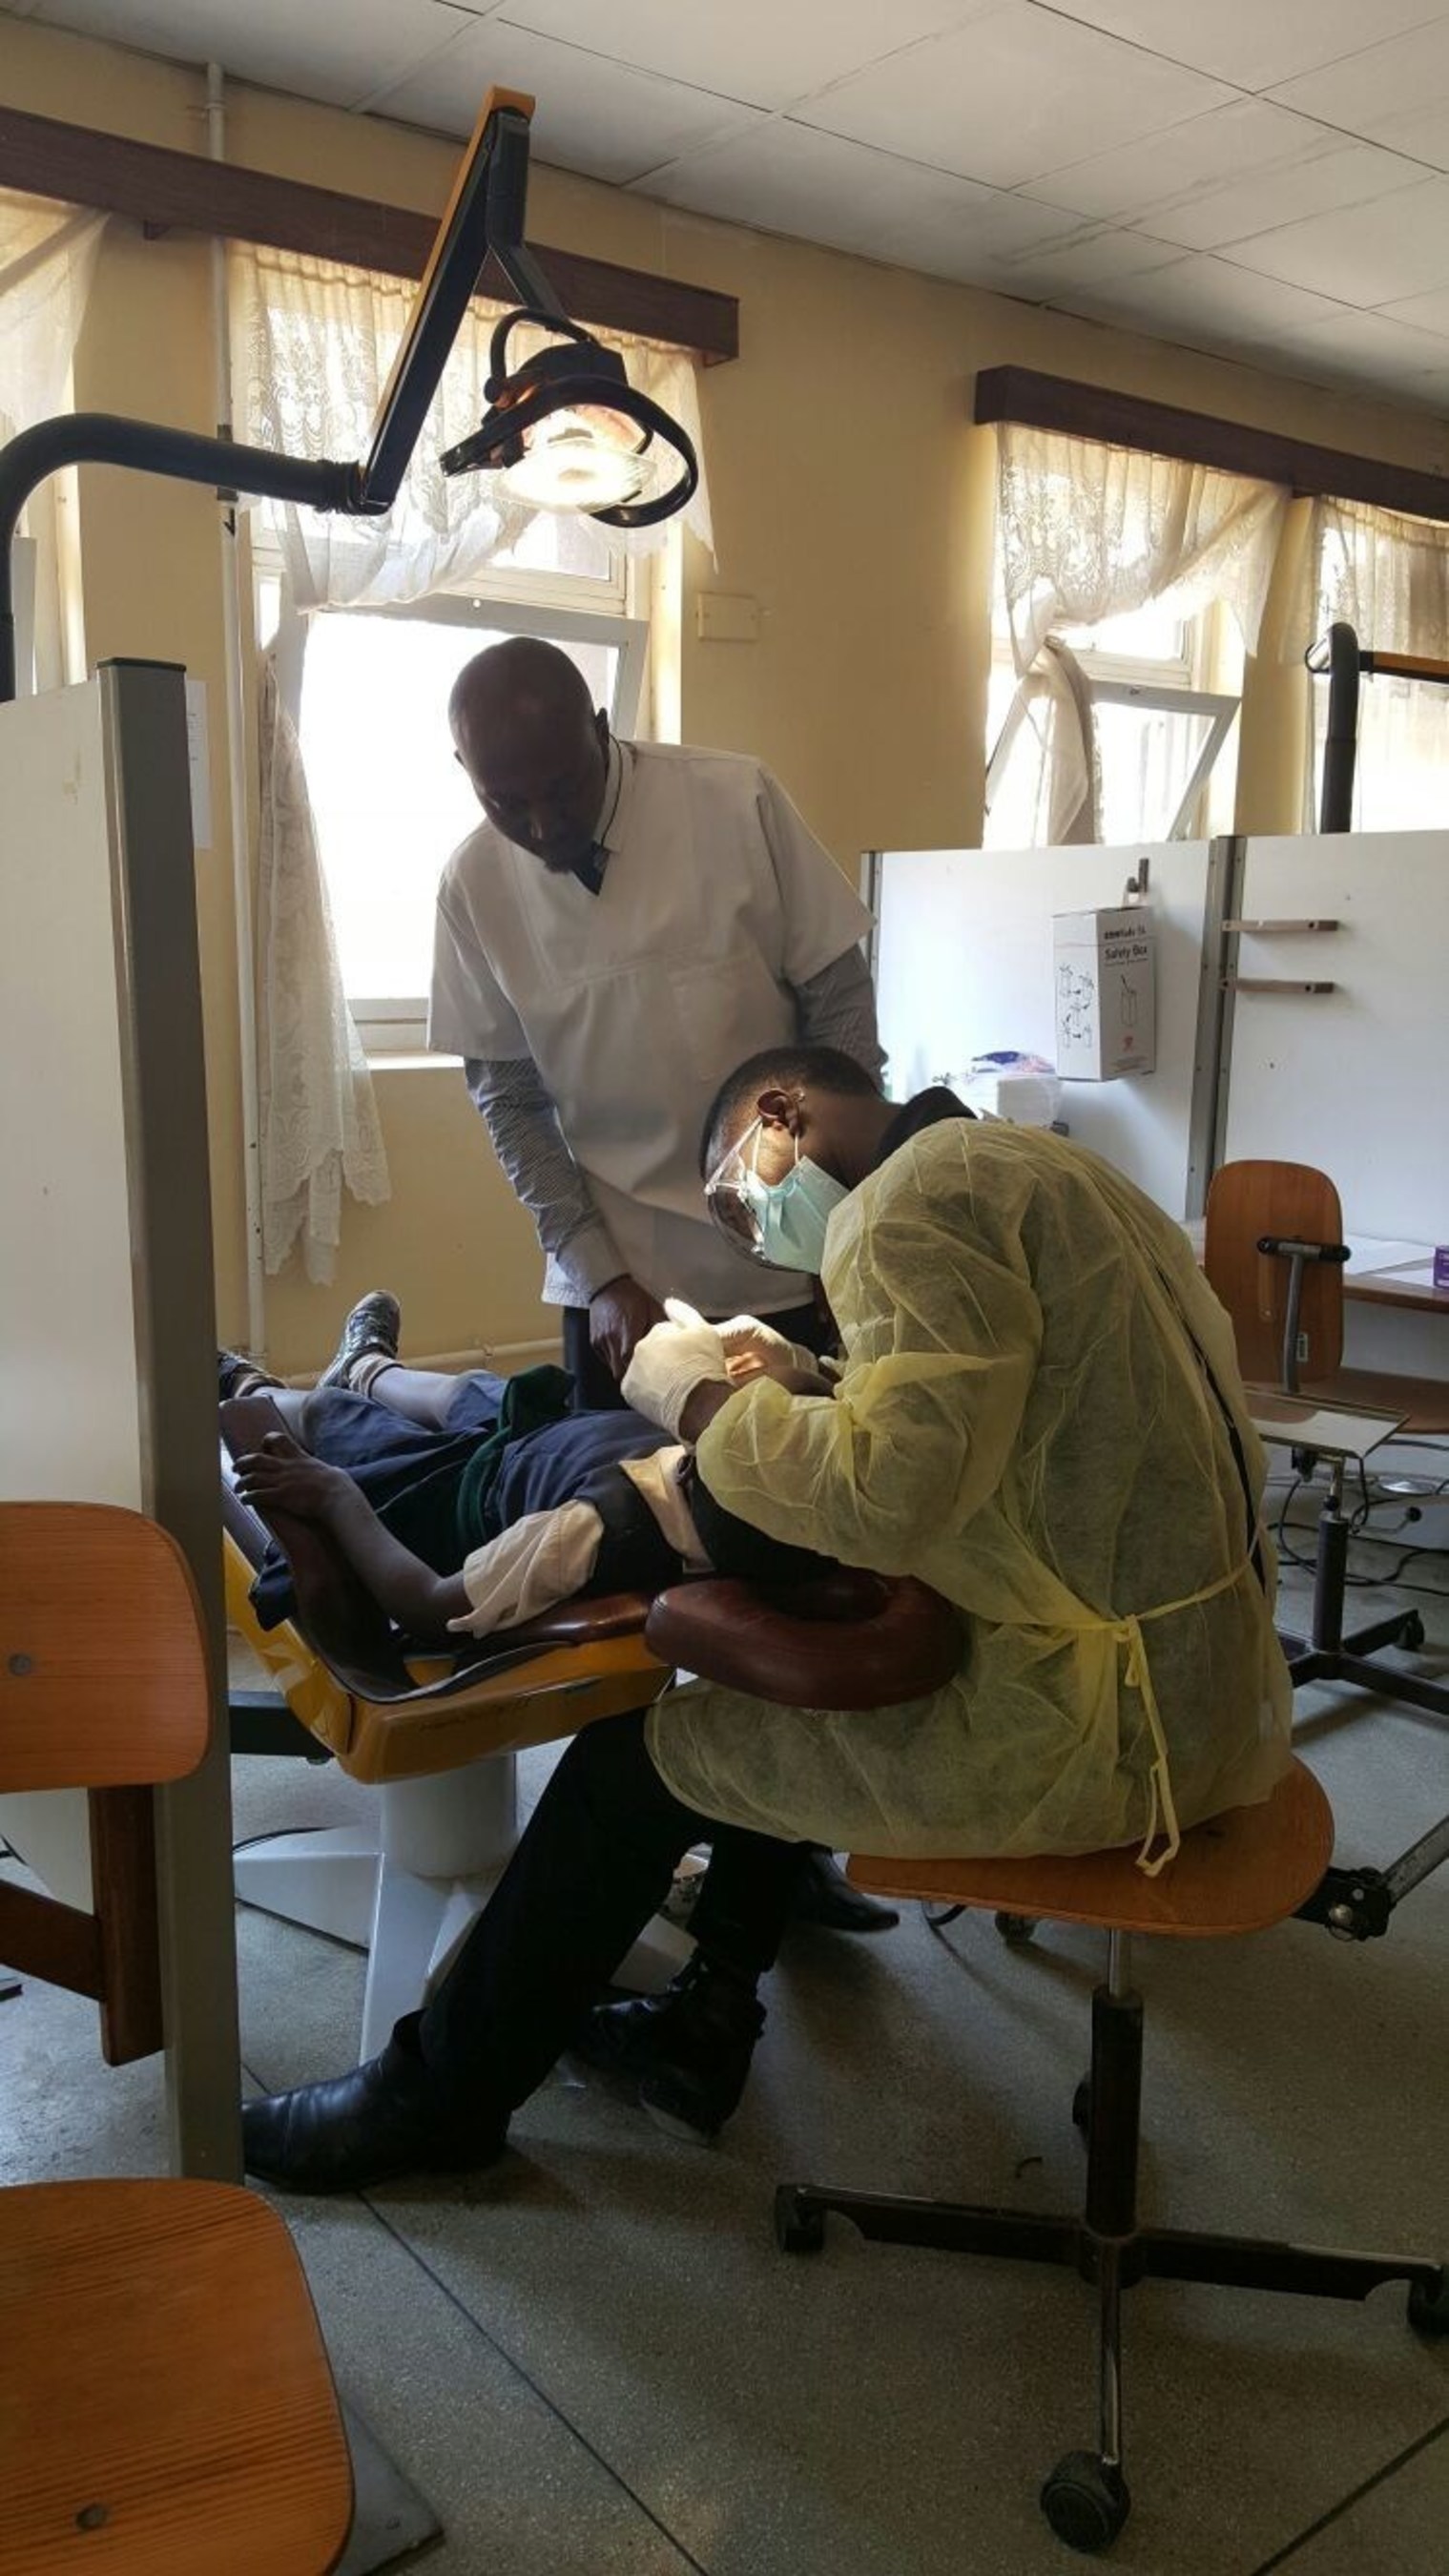 A third year Dental Therapy Student provides free dental treatment to a primary school student under the supervision of the Dental Therapy School Principal.